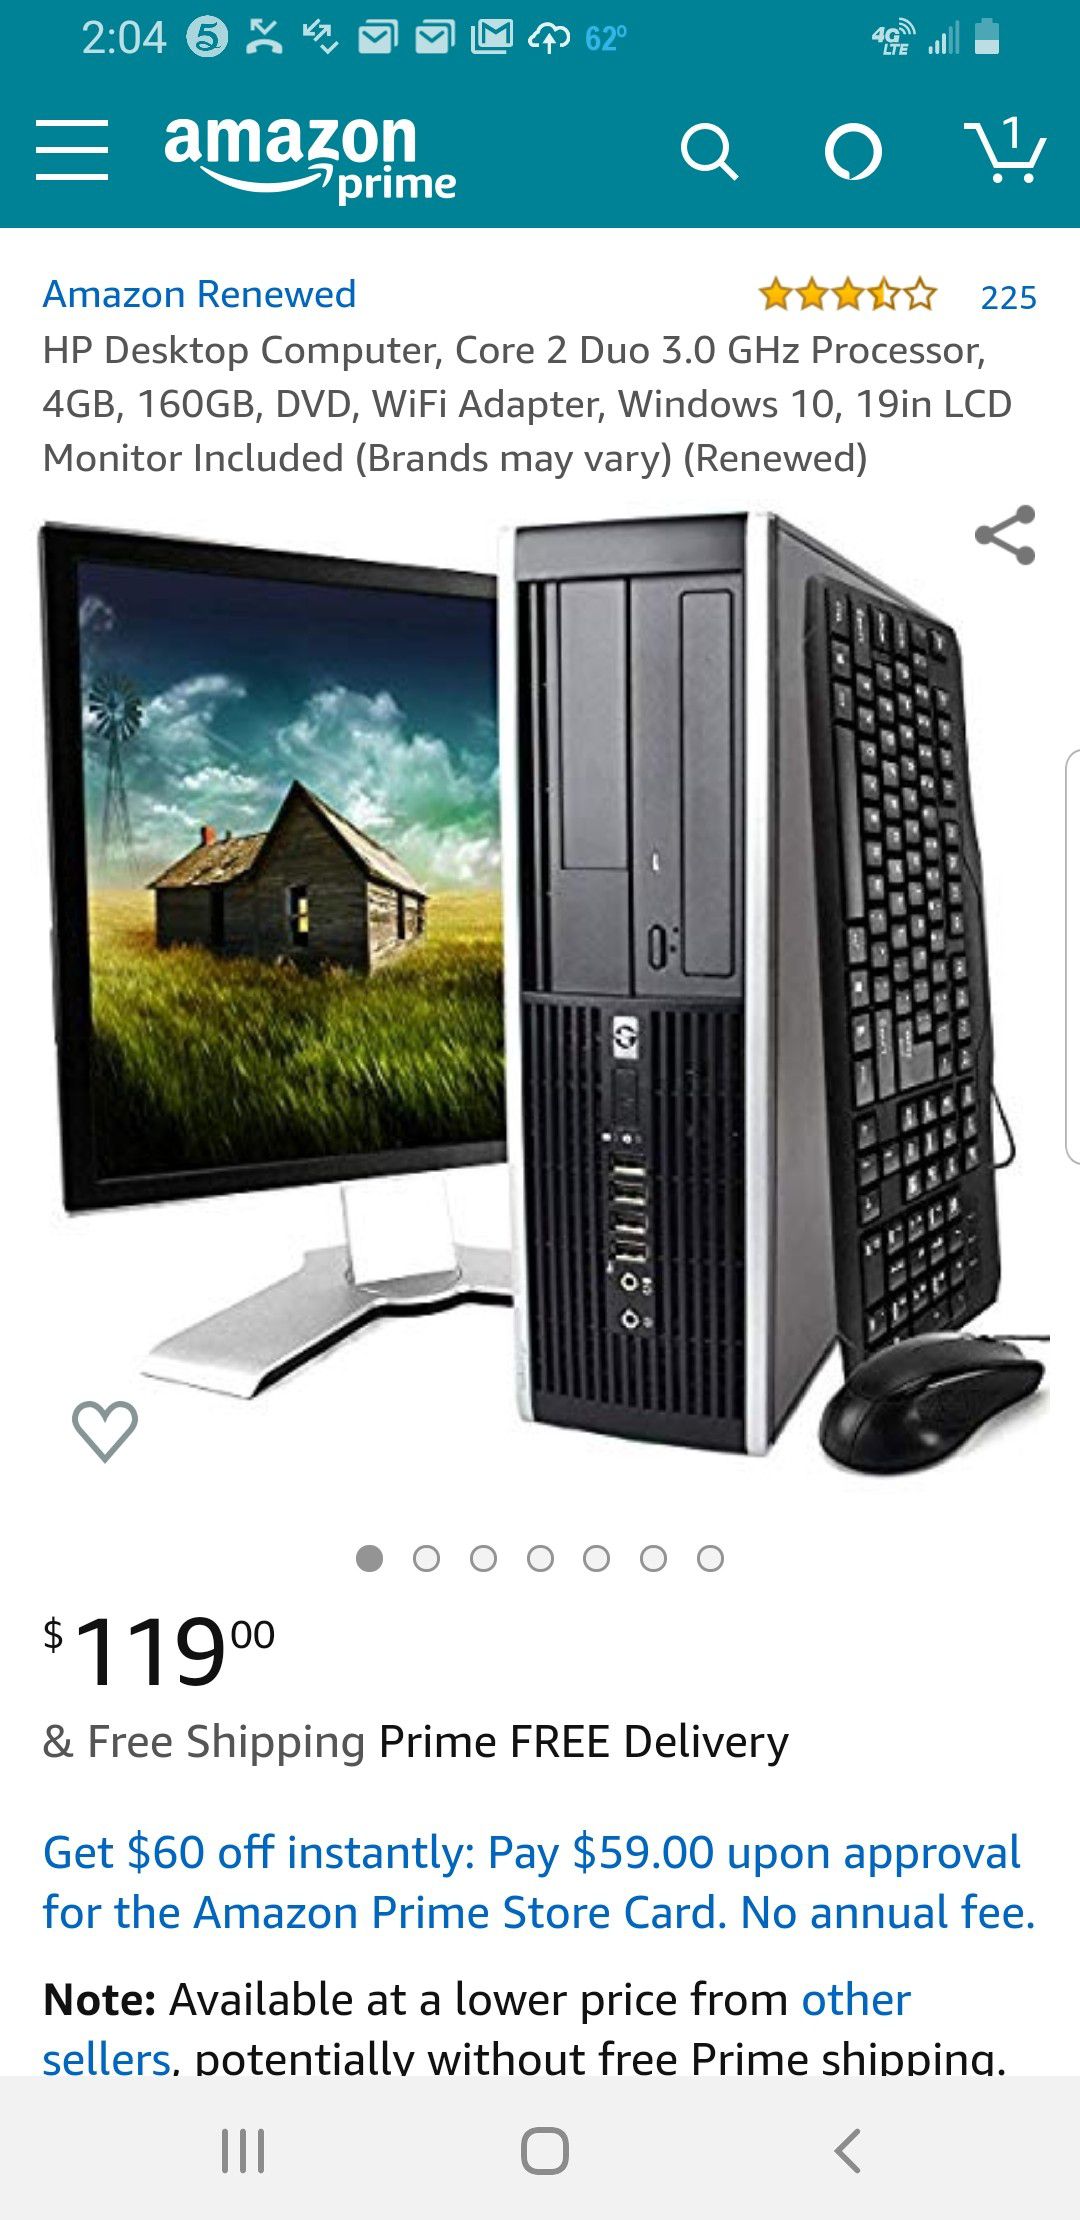 HP Desktop Computer, Core 2 Duo 3.0 GHz Processor, 4GB, 160GB, DVD, WiFi Adapter, Windows 10, 19in LCD Monitor Included (Brands may vary) (Renewed